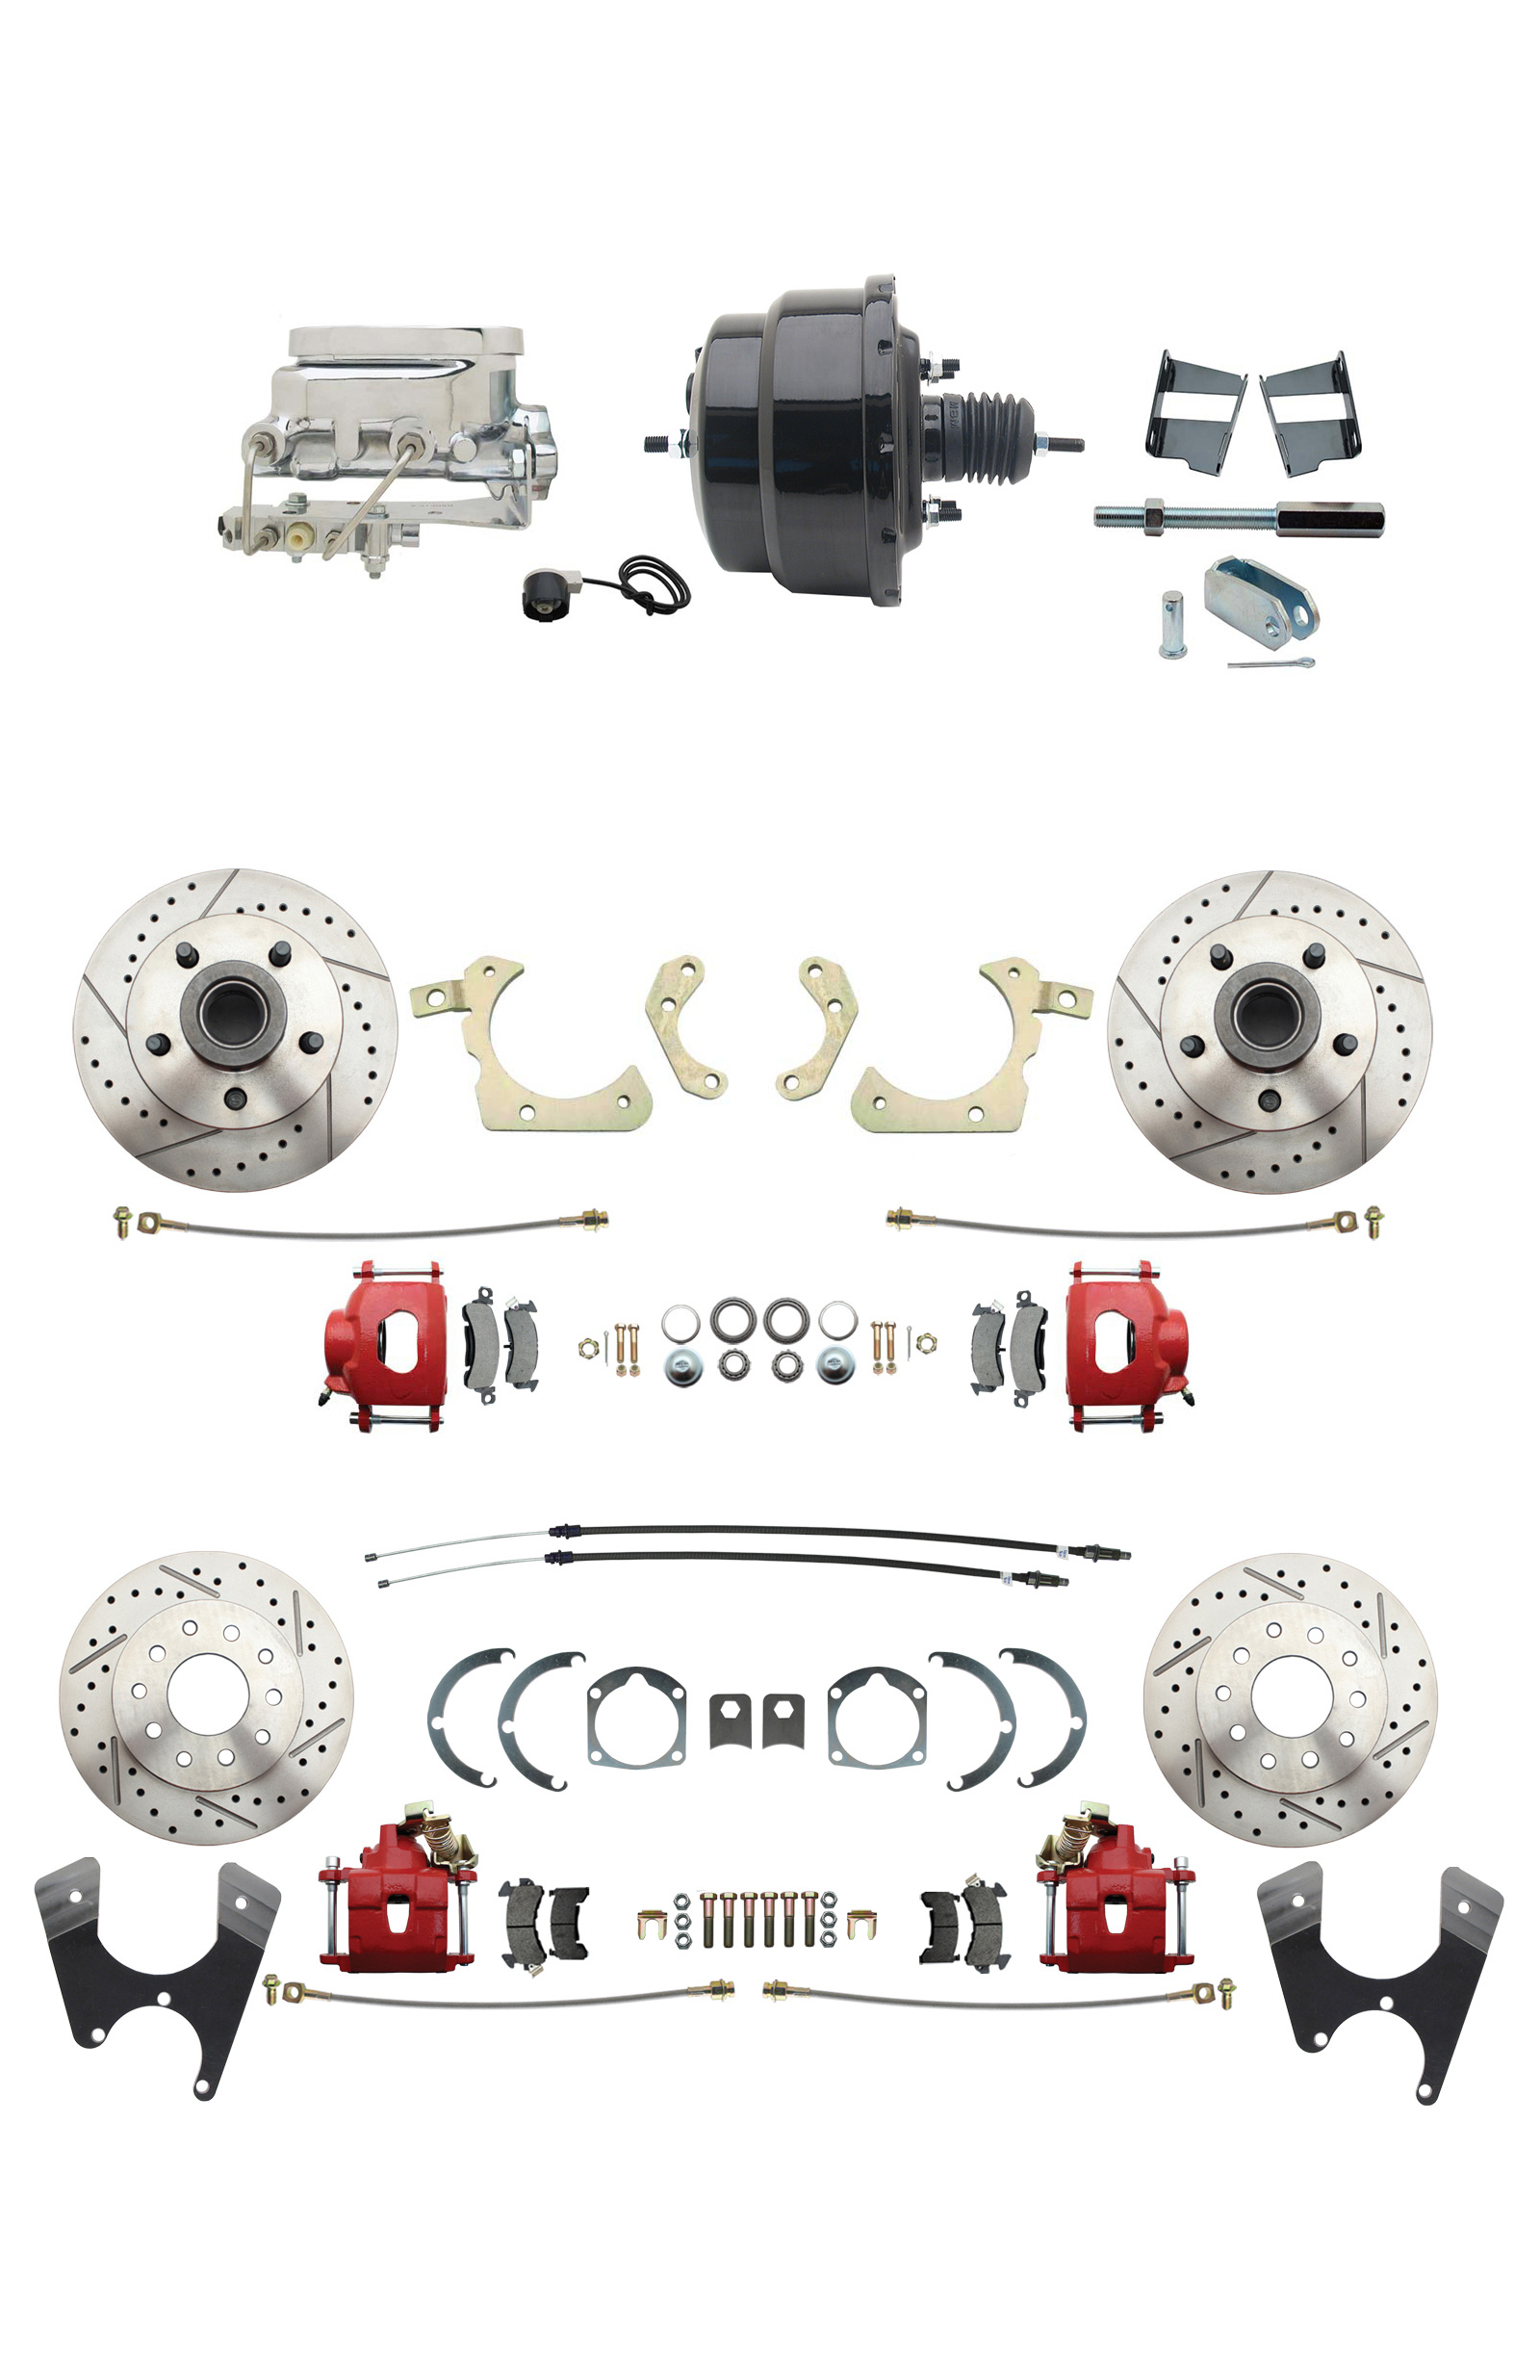 1959-1964 GM Full Size Front & Rear Power Disc Brake Kit Red Powder Coated Calipers Drilled/Slotted Rotors (Impala, Bel Air, Biscayne) & 8 Dual Powder Coated Black Booster Conversion Kit W/ Chrome Flat Top Master Cylind